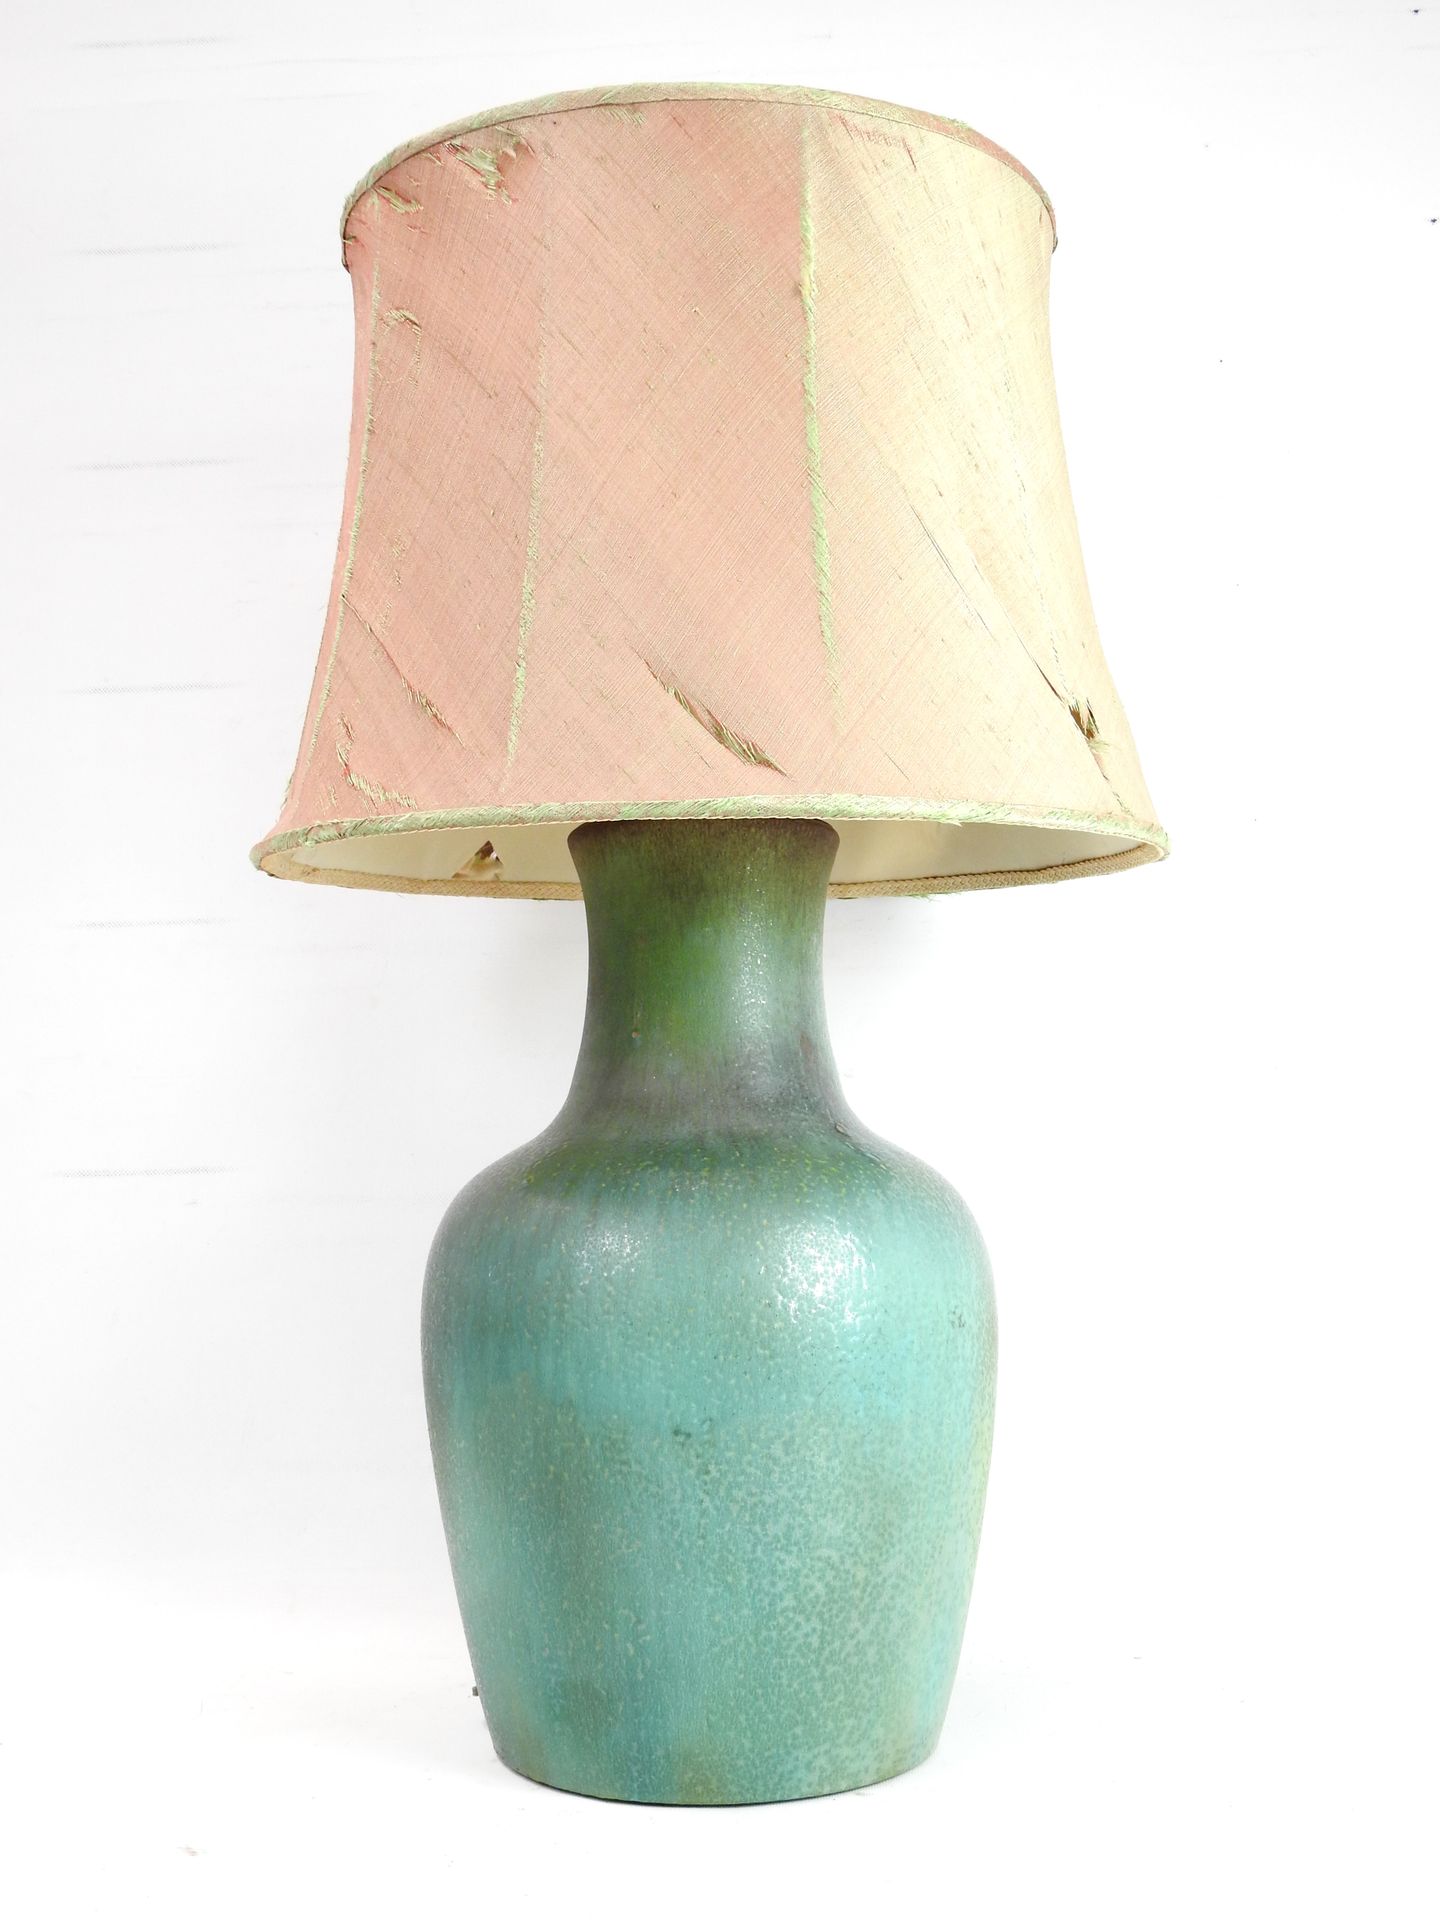 Null Suzanne RAMIE (1900-1974) - Madoura workshop : Important lamp in green enam&hellip;